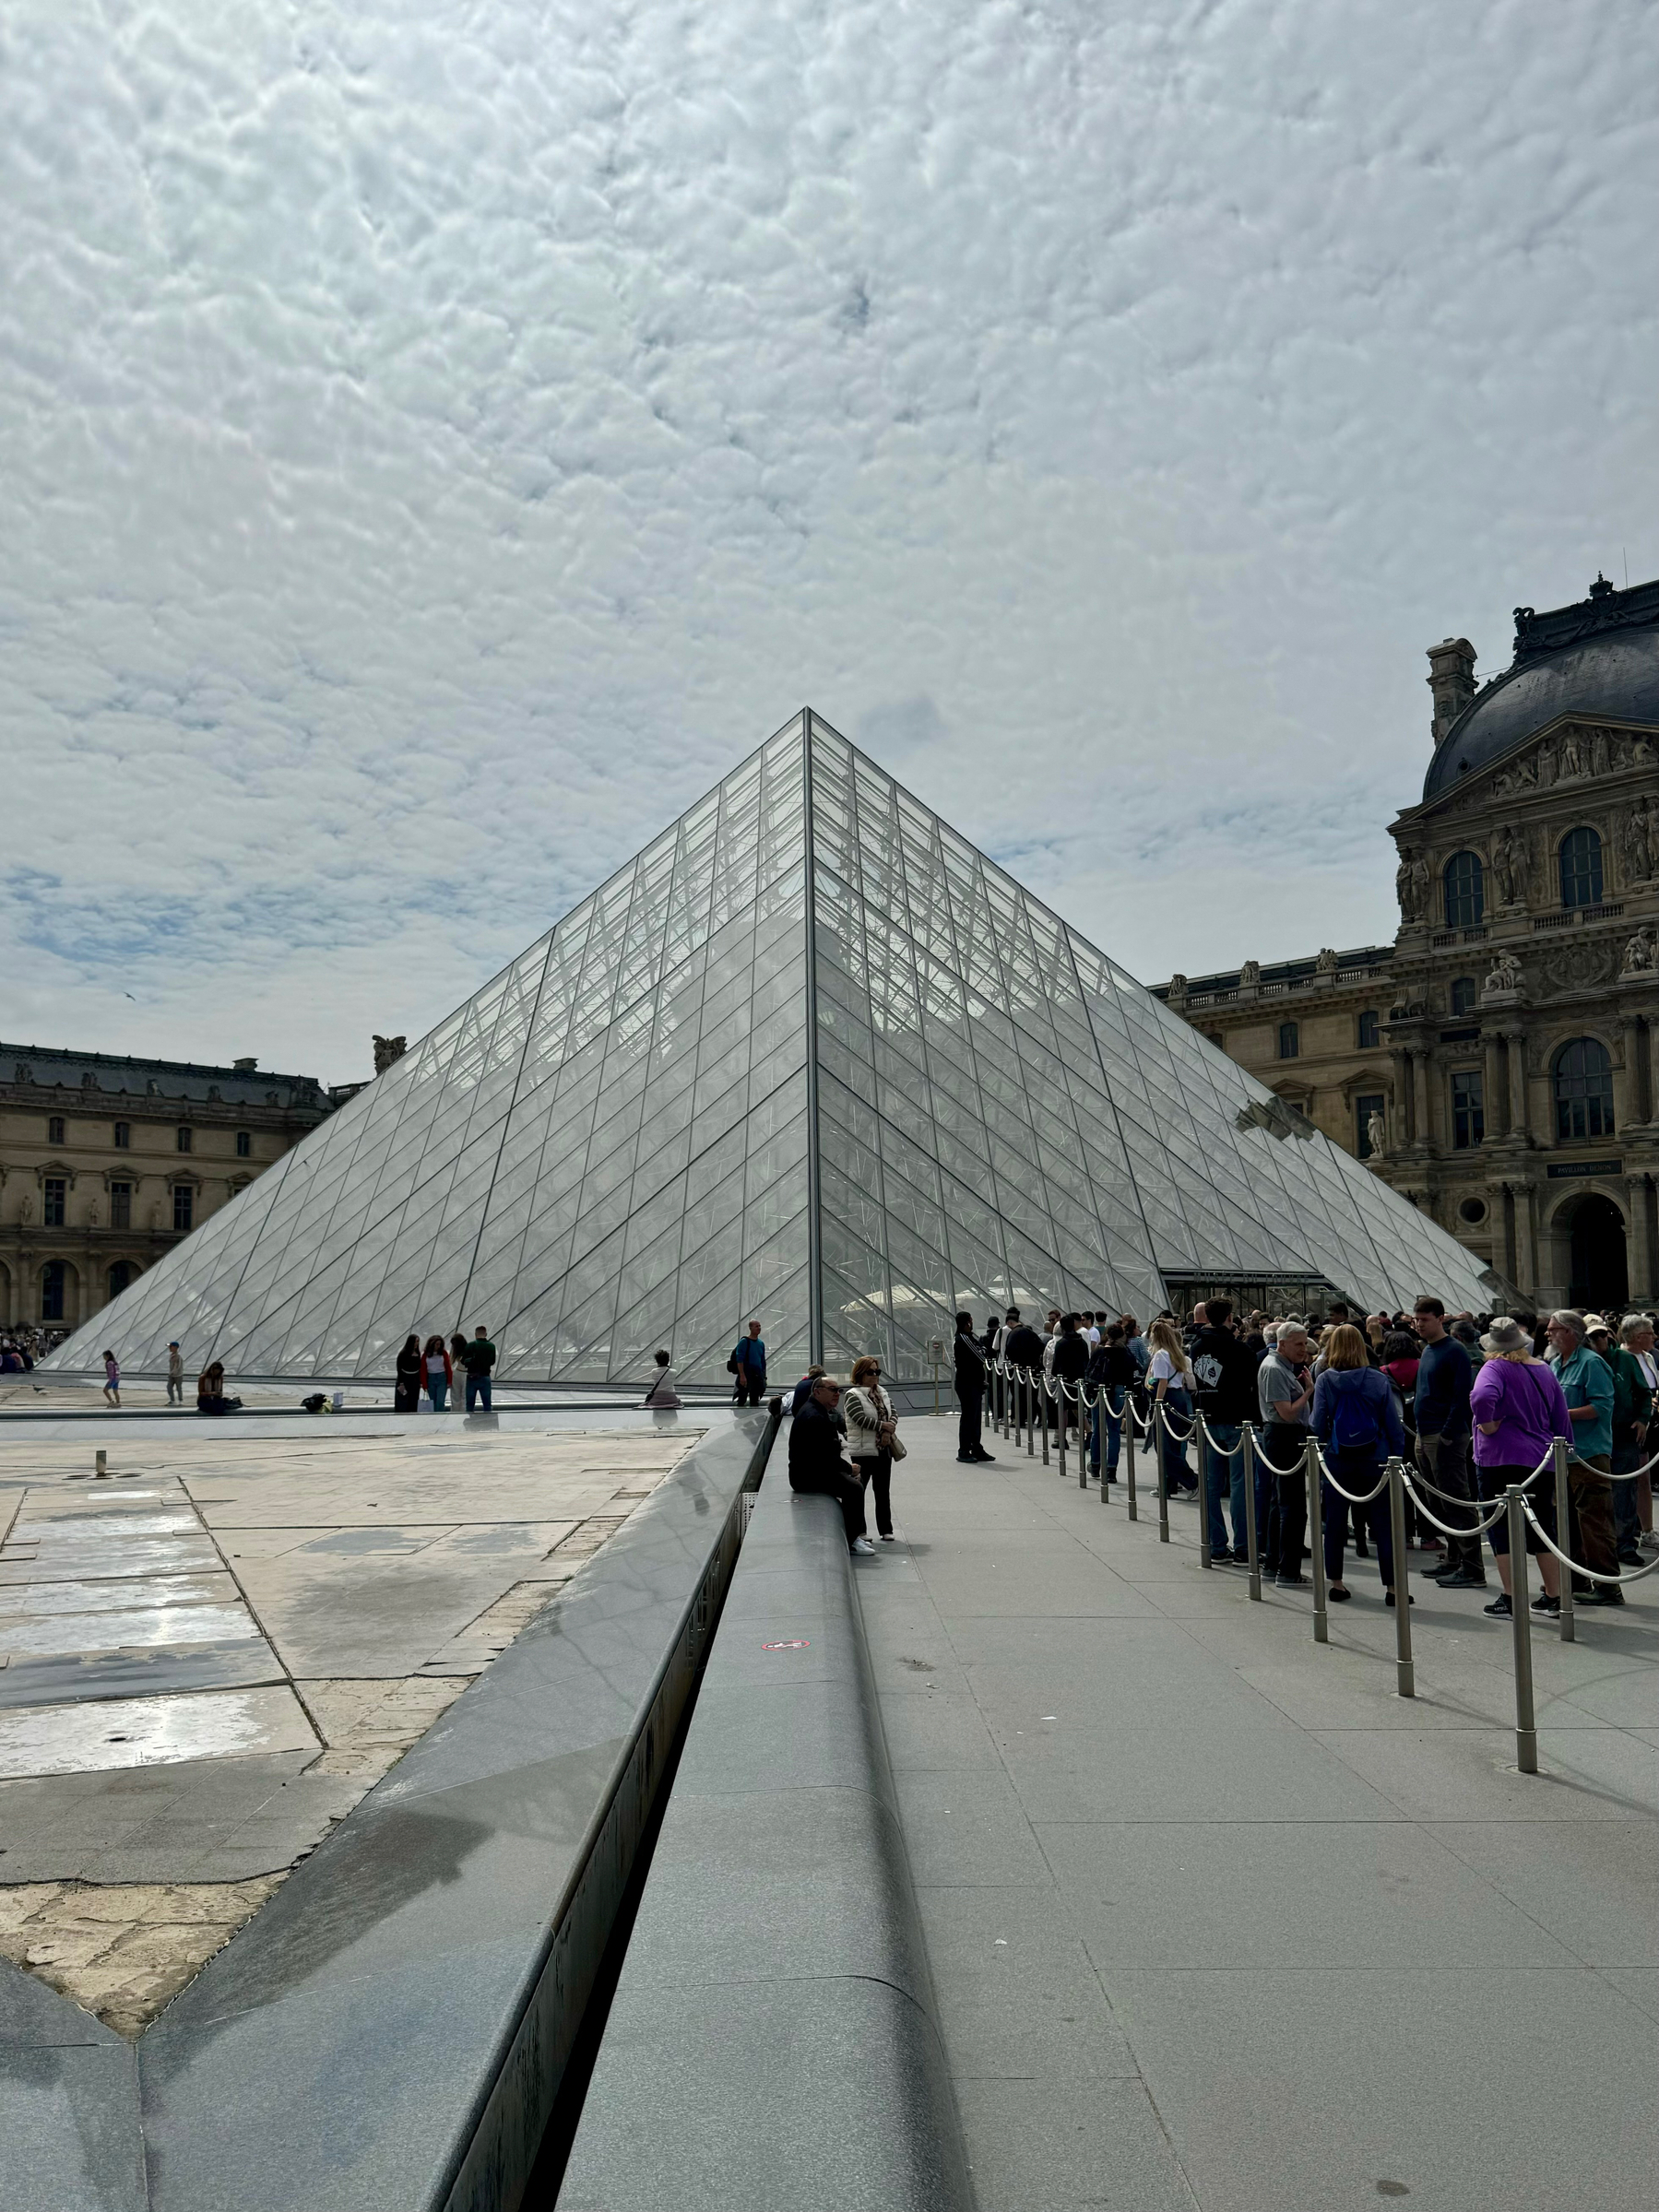 The Louvre Pyramid in Paris on a cloudy day with tourists queuing outside.